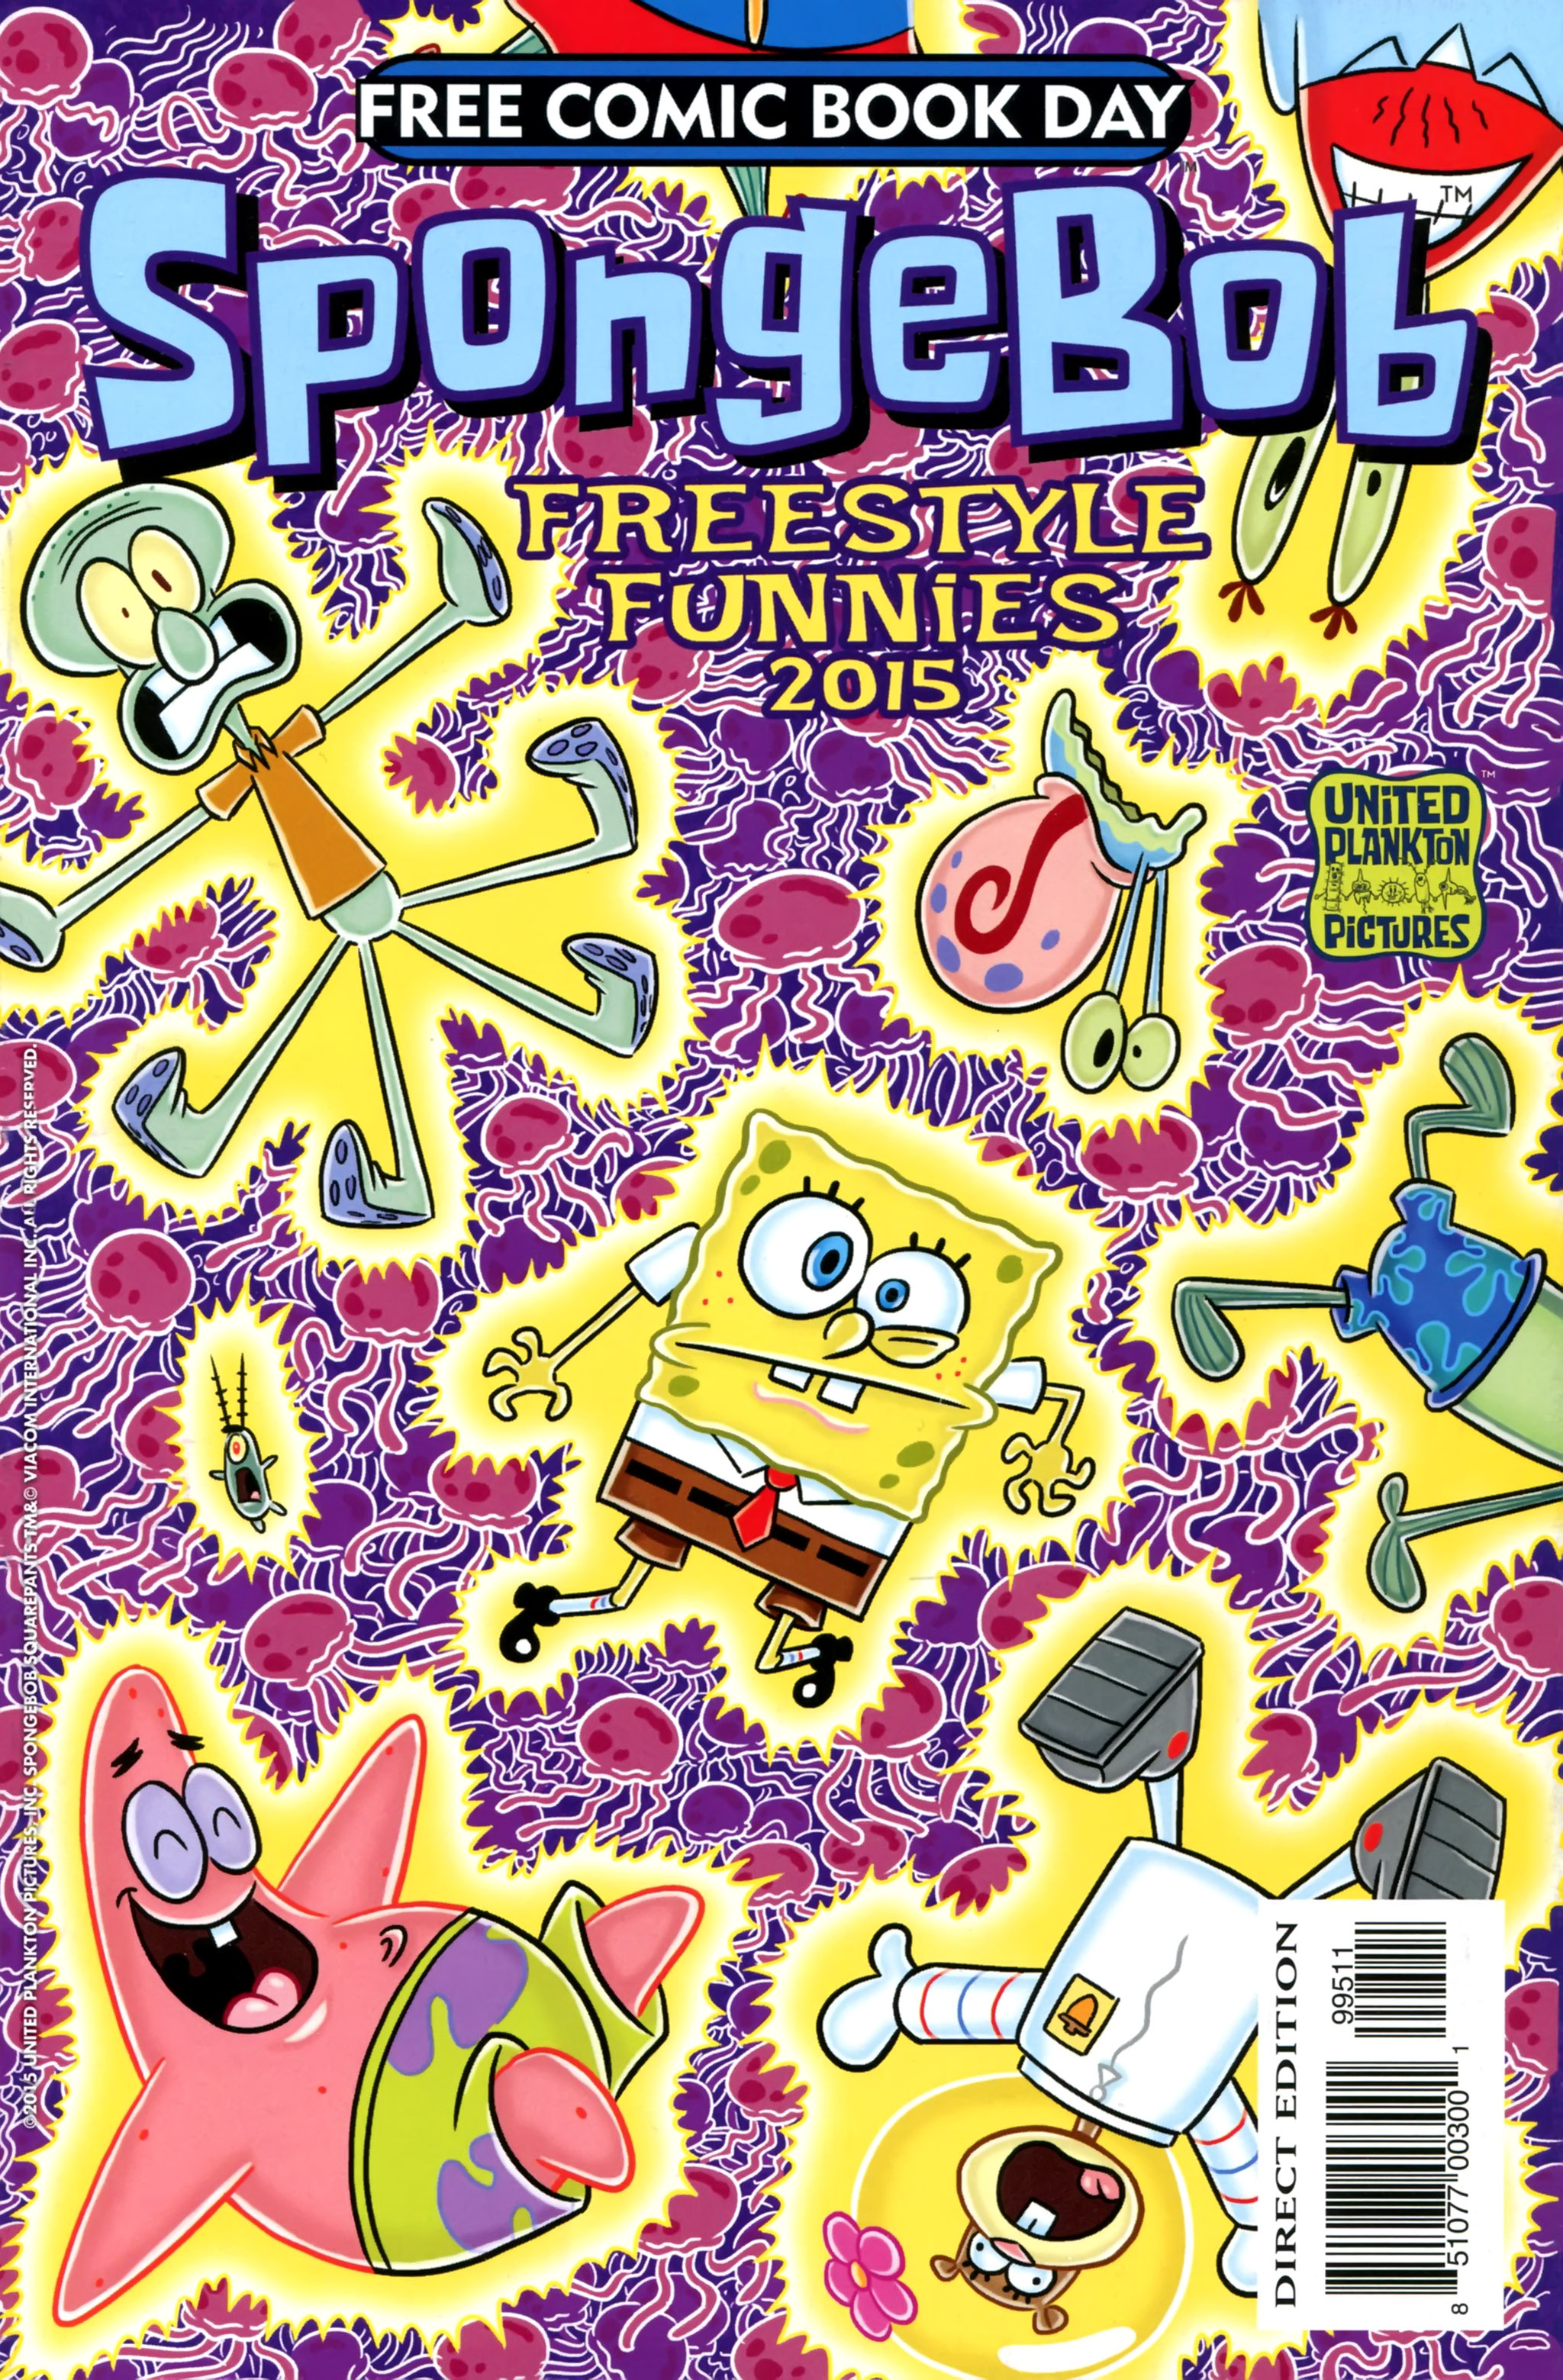 Read online Free Comic Book Day 2015 comic -  Issue # SpongeBob Freestyle Funnies 2015 - 1